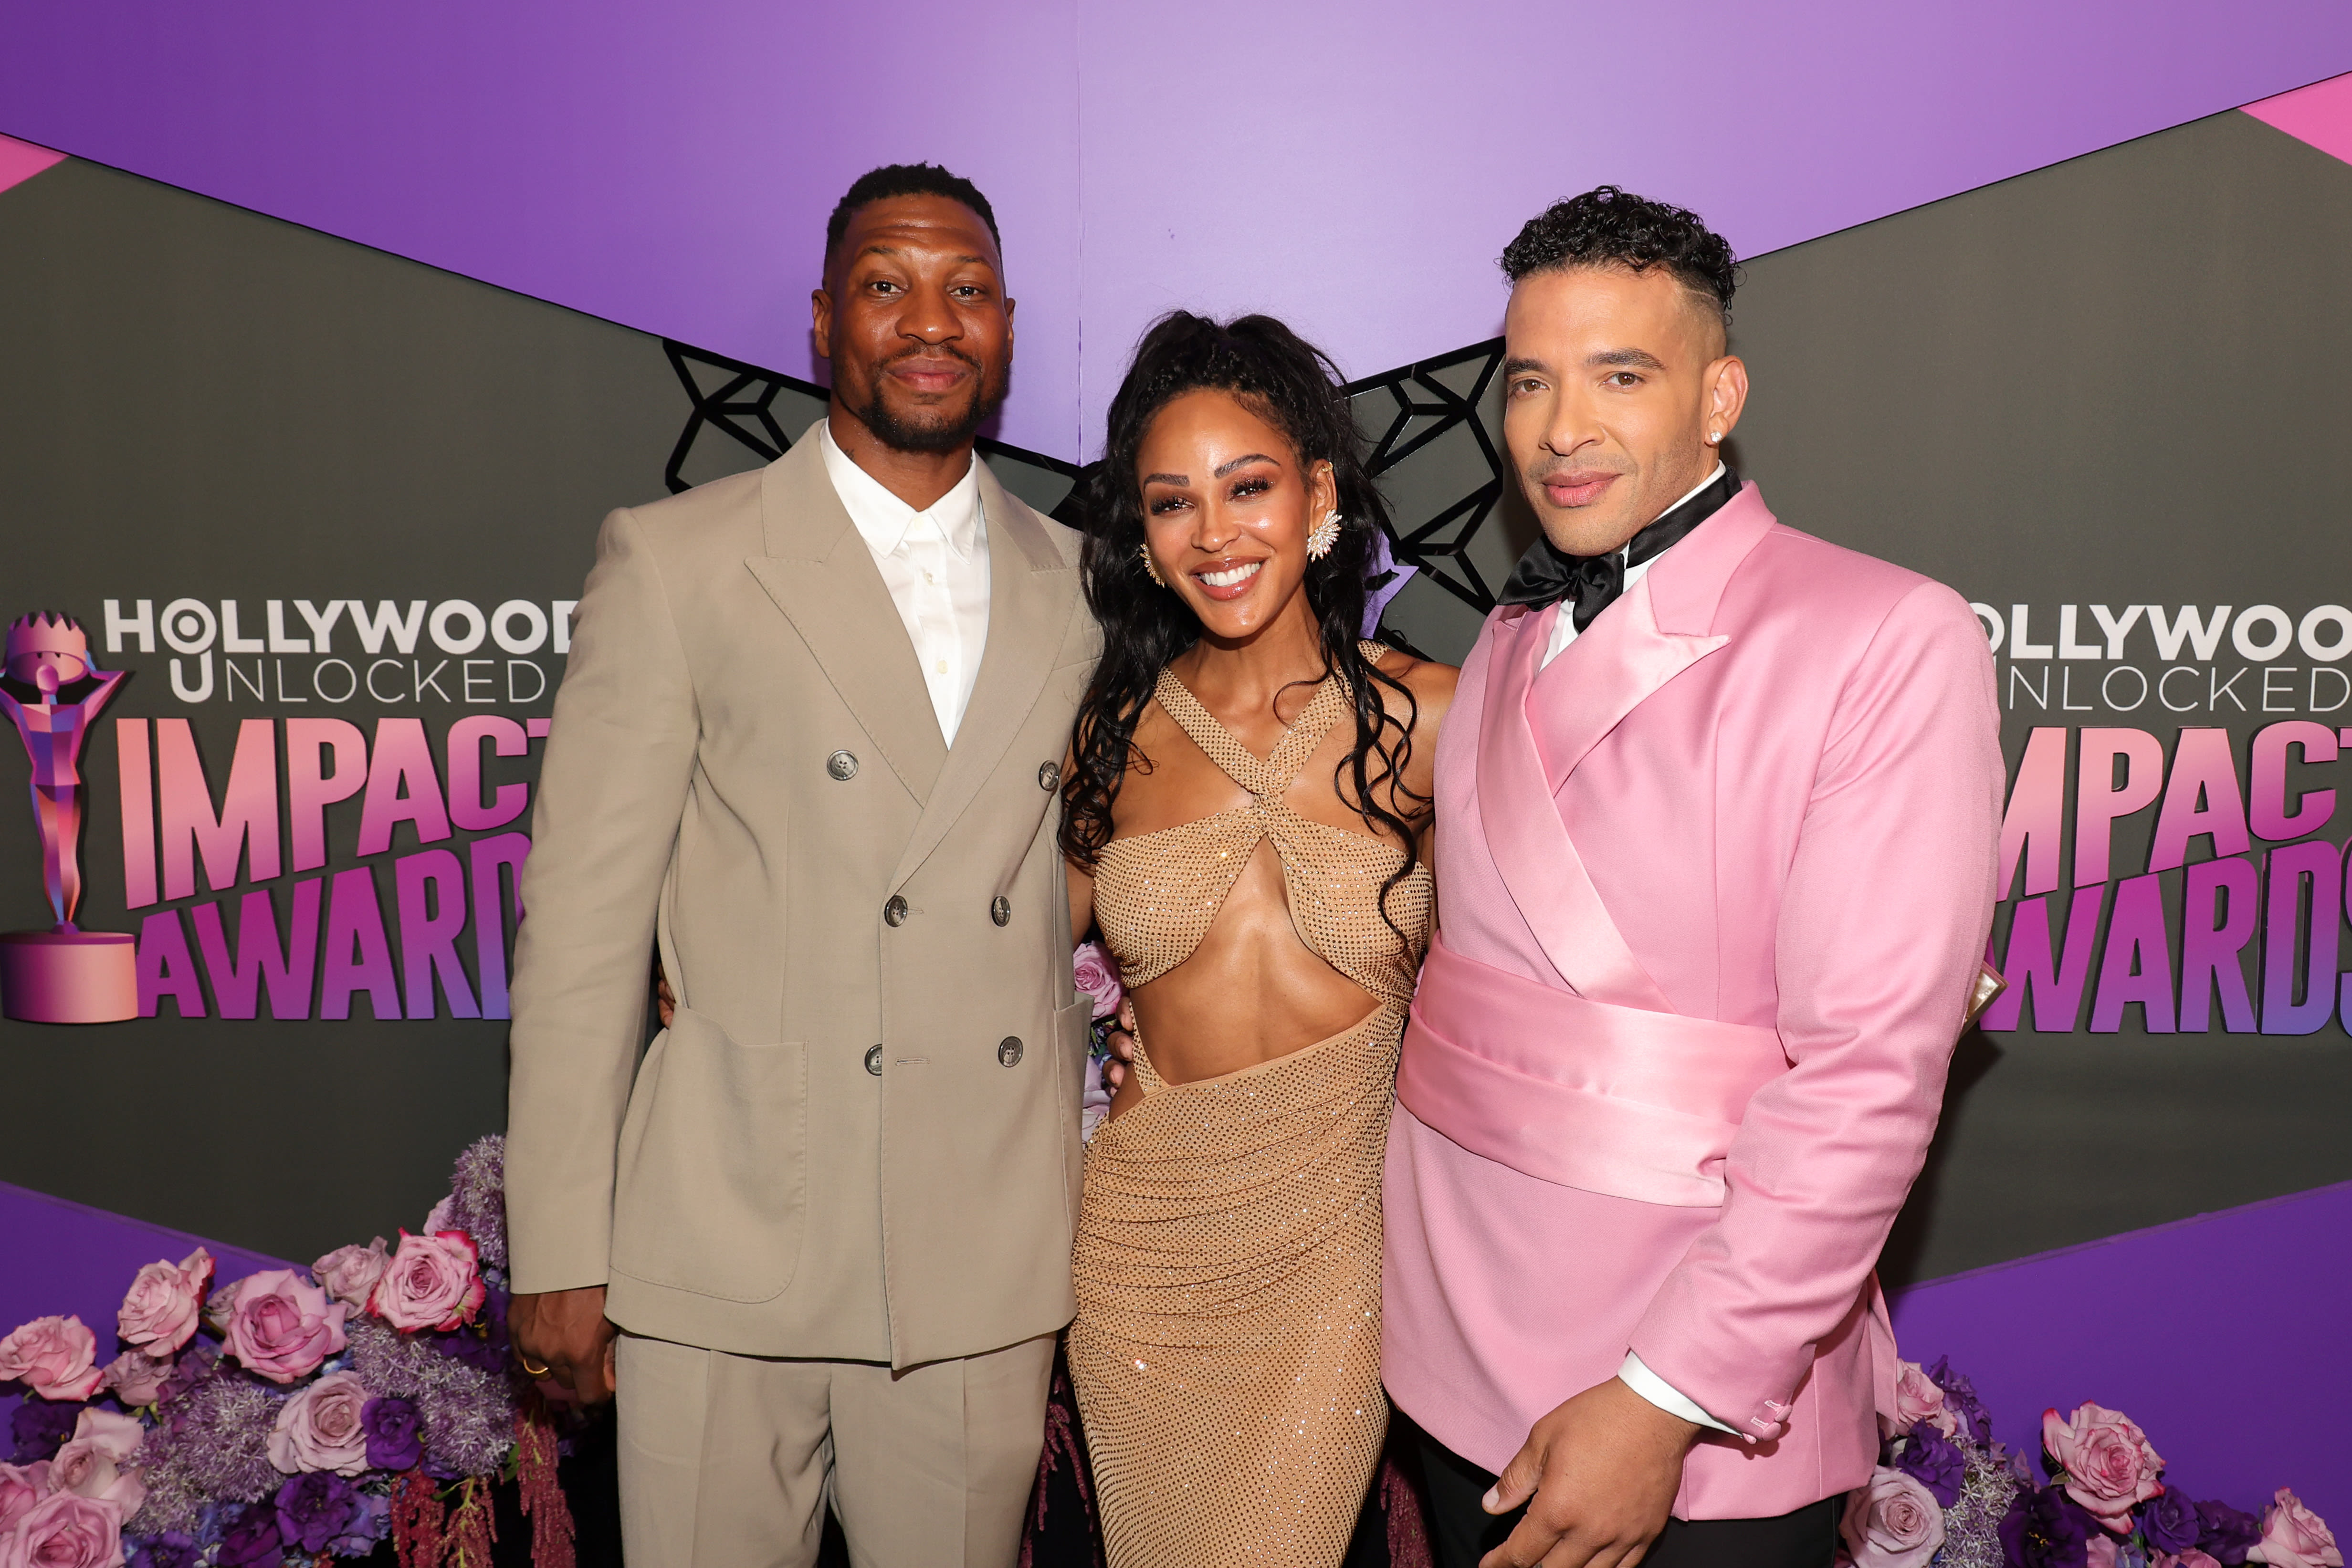 Jonathan Majors Tearily Accepts Perseverance Award: “I’ve Had to Embody That Word More Than I Wished or Wanted To”